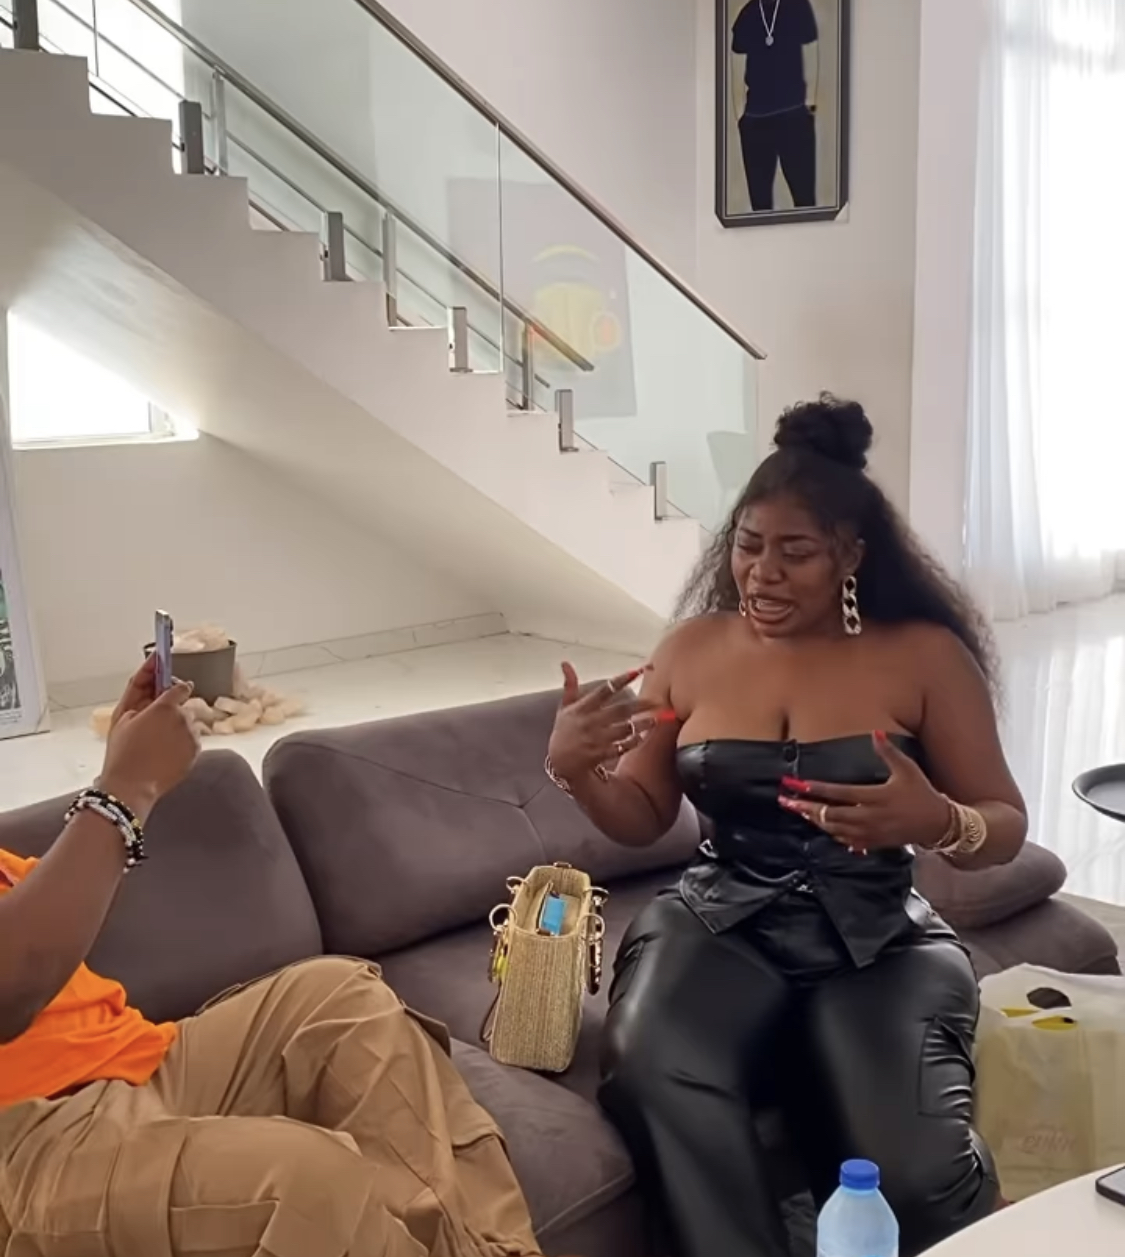 We are in love - Influencer Ashmusy reveals after visiting Don Jazzy at home [photos]